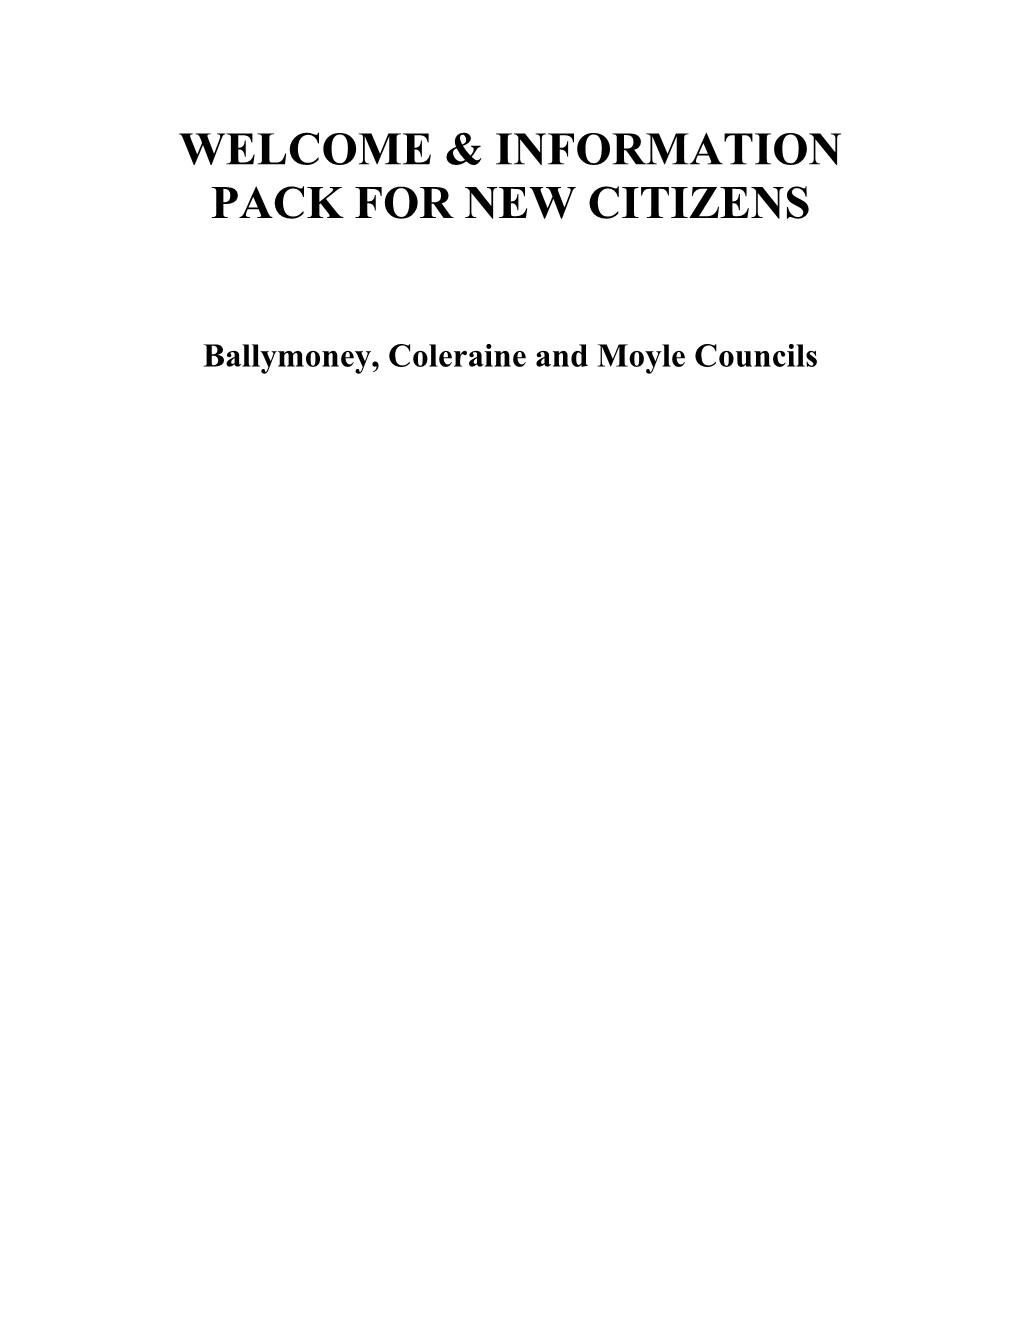 Welcome & Information Pack for New Citizens